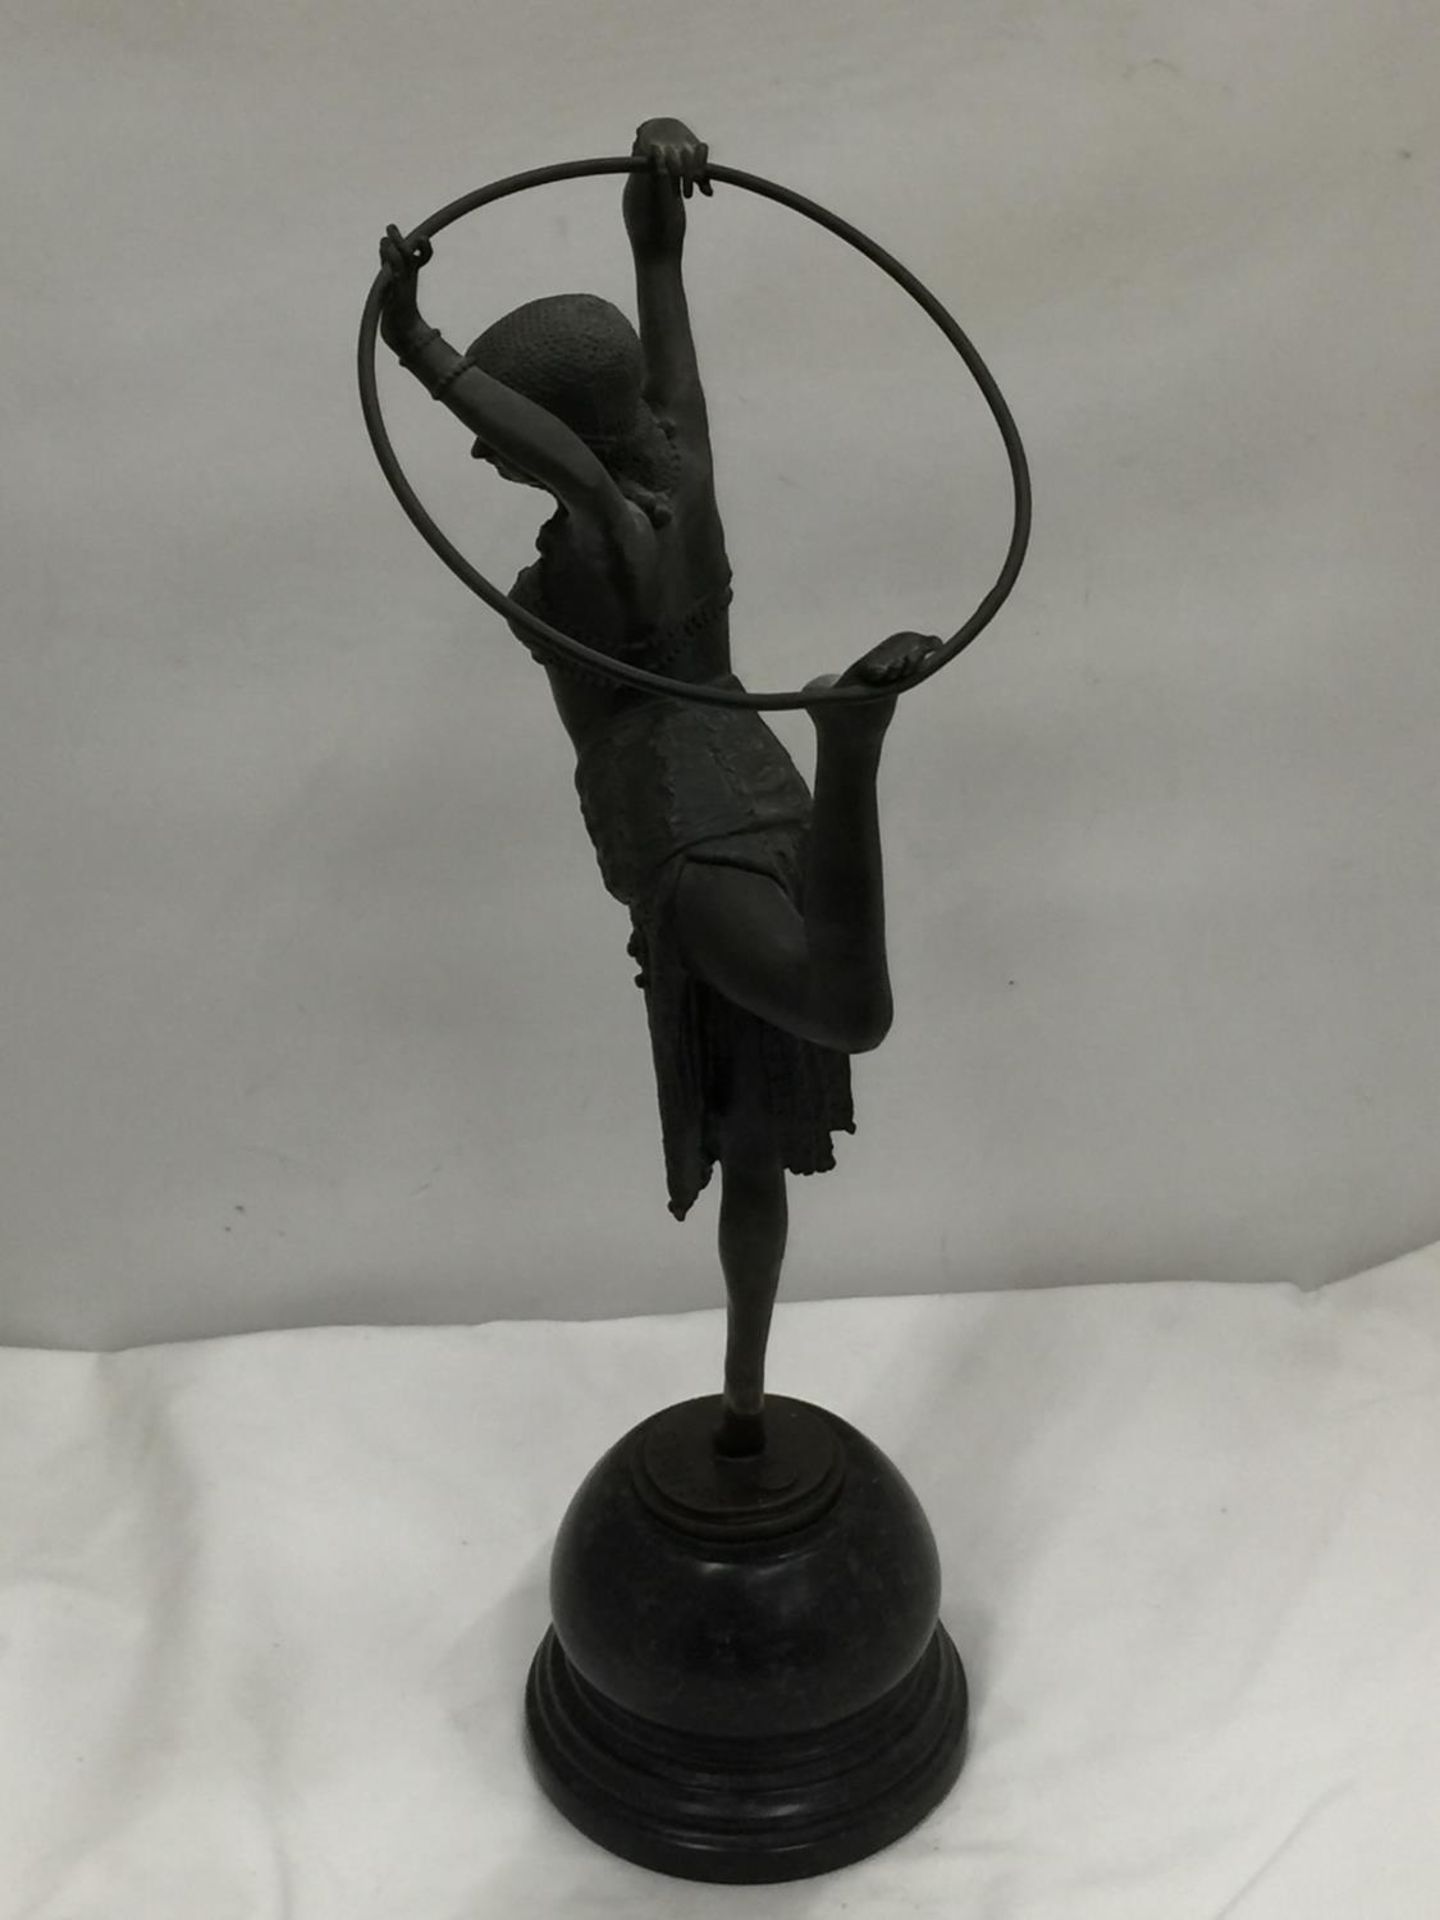 AN ART DECO STYLE BRONZE OF AN EGYPTIAN STYLE HOOP DANCER ON A MARBLE BASE SIGNED D.H. CHIPARUS H: - Image 6 of 7